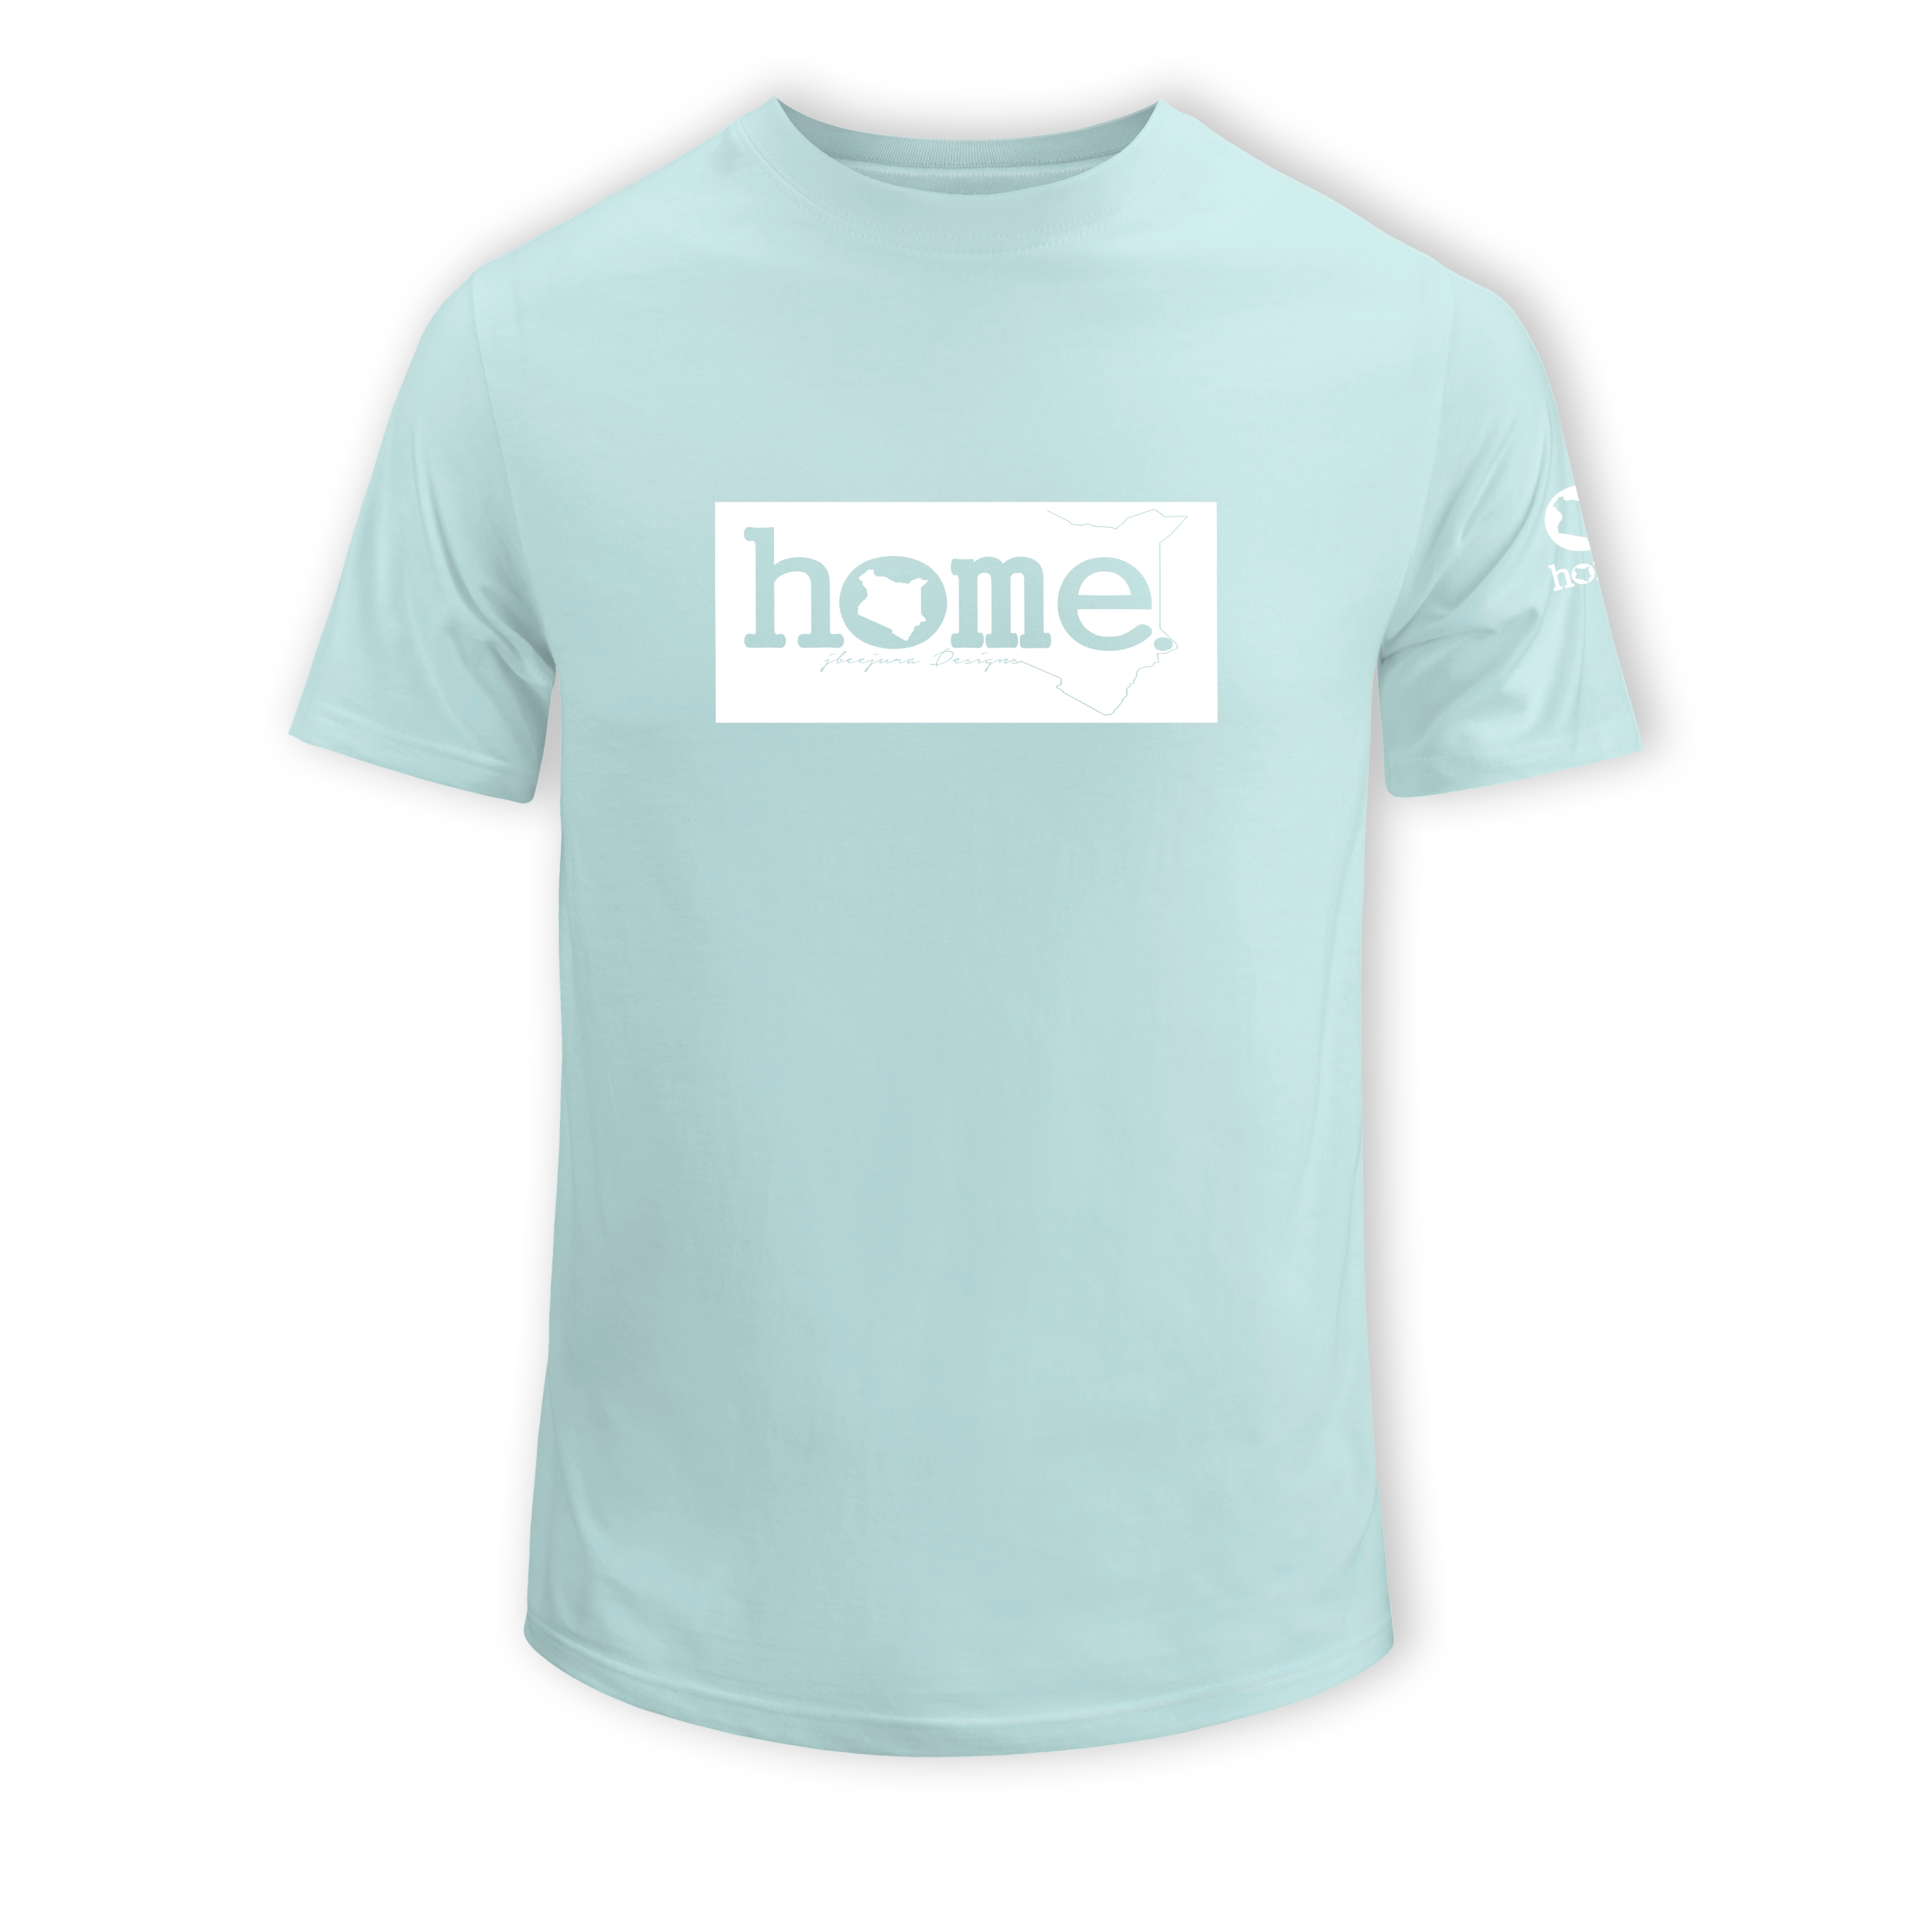 home_254 SHORT-SLEEVED MISTY BLUE T-SHIRT WITH A WHITE CLASSIC PRINT – COTTON PLUS FABRIC